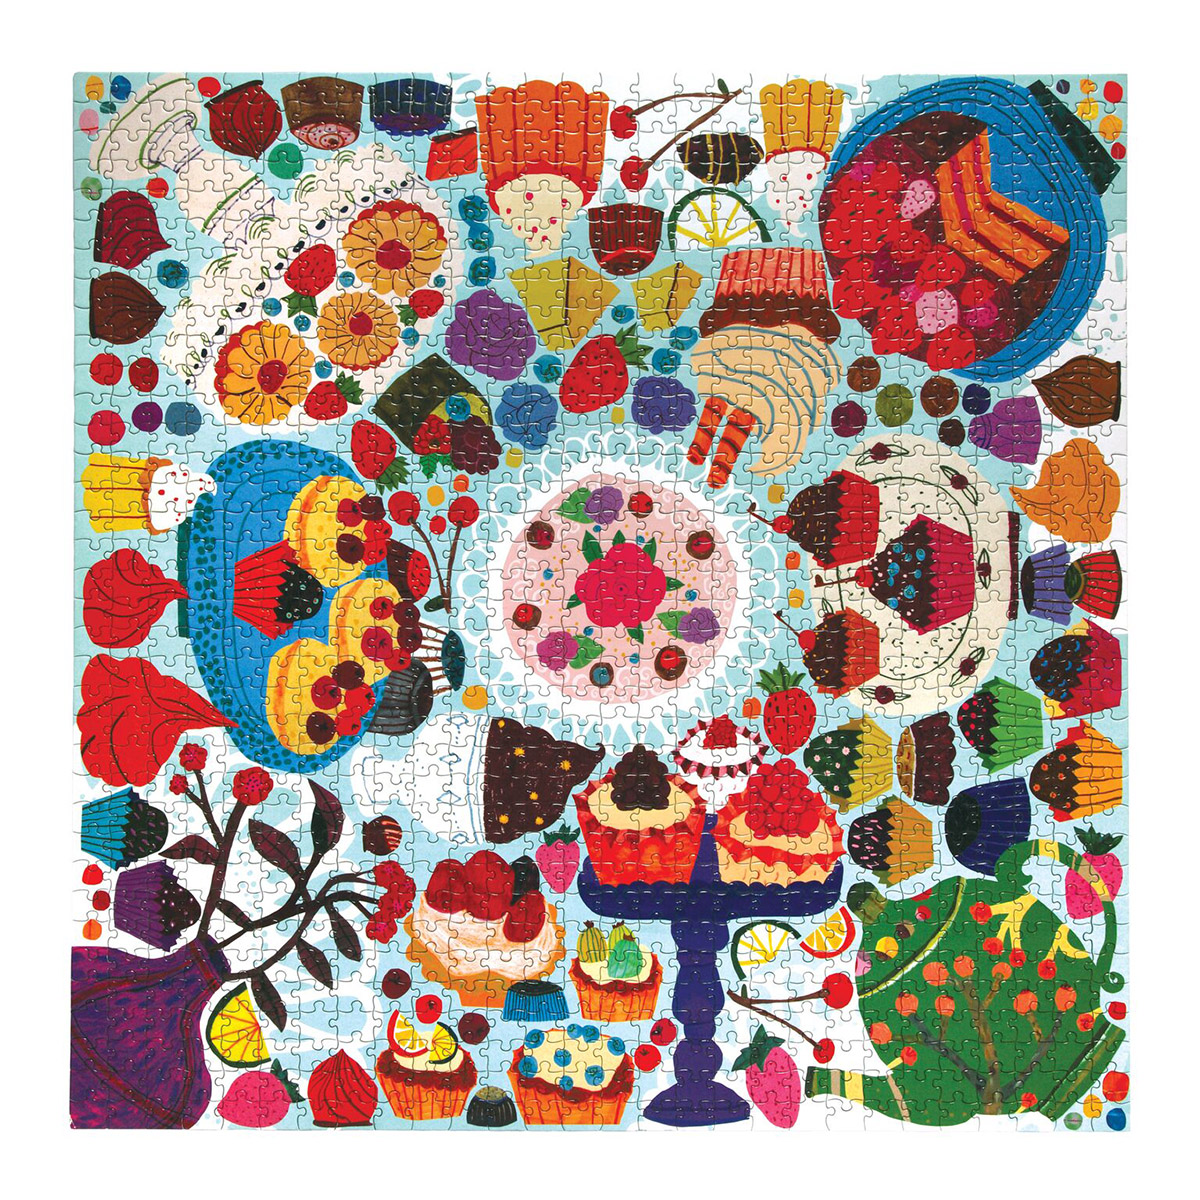 Love is Sweet Candy Jigsaw Puzzle By MasterPieces